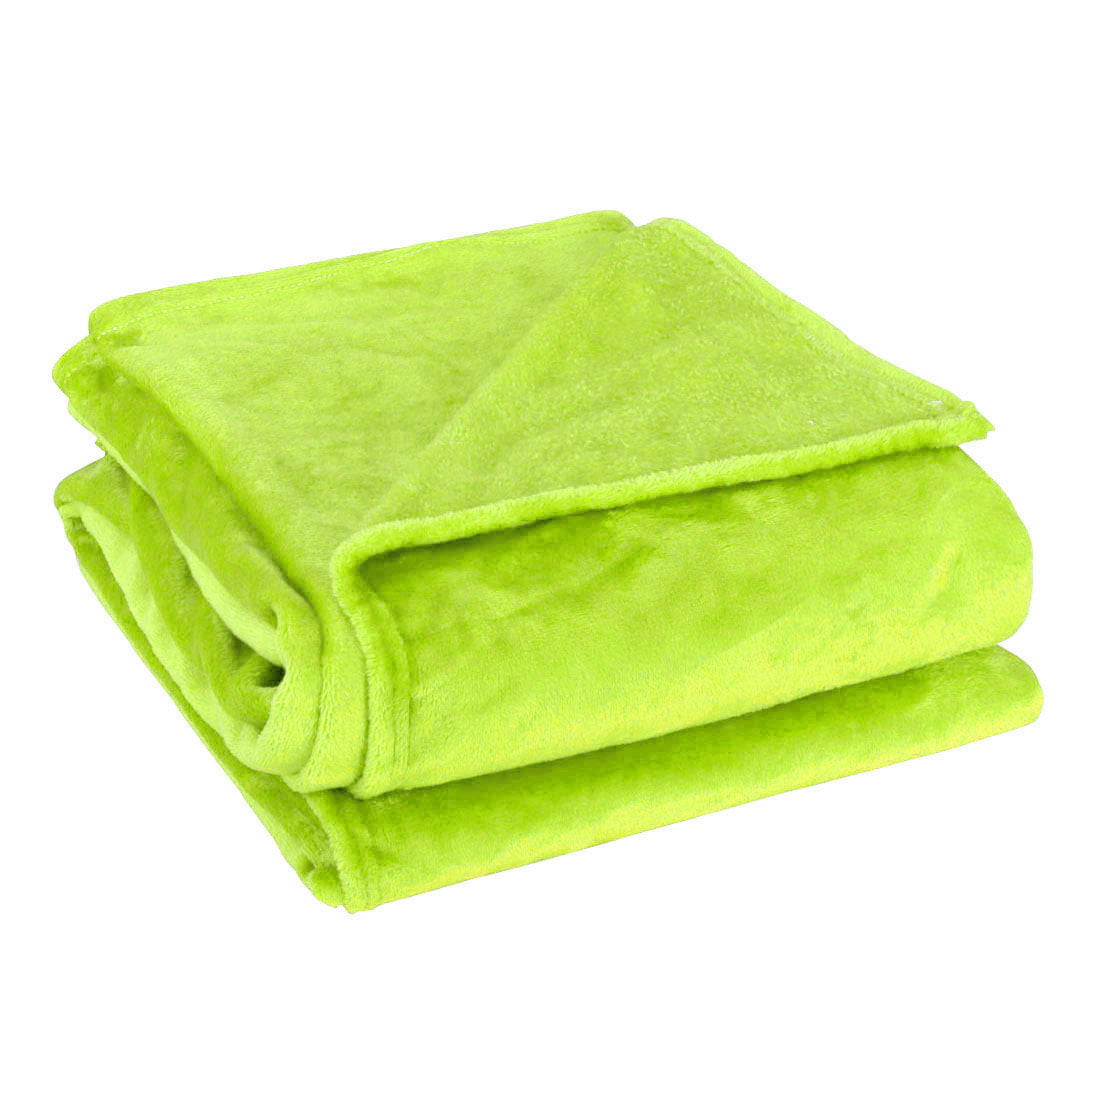 50 x 60 Luxury Sofa Throws and Blankets with Ruffle Trim Lightweight Plush Microfiber Solid Decor Blanket for Couch,Bed PiccoCasa Flannel Fleece Blanket Throw Size Lime Green Chair